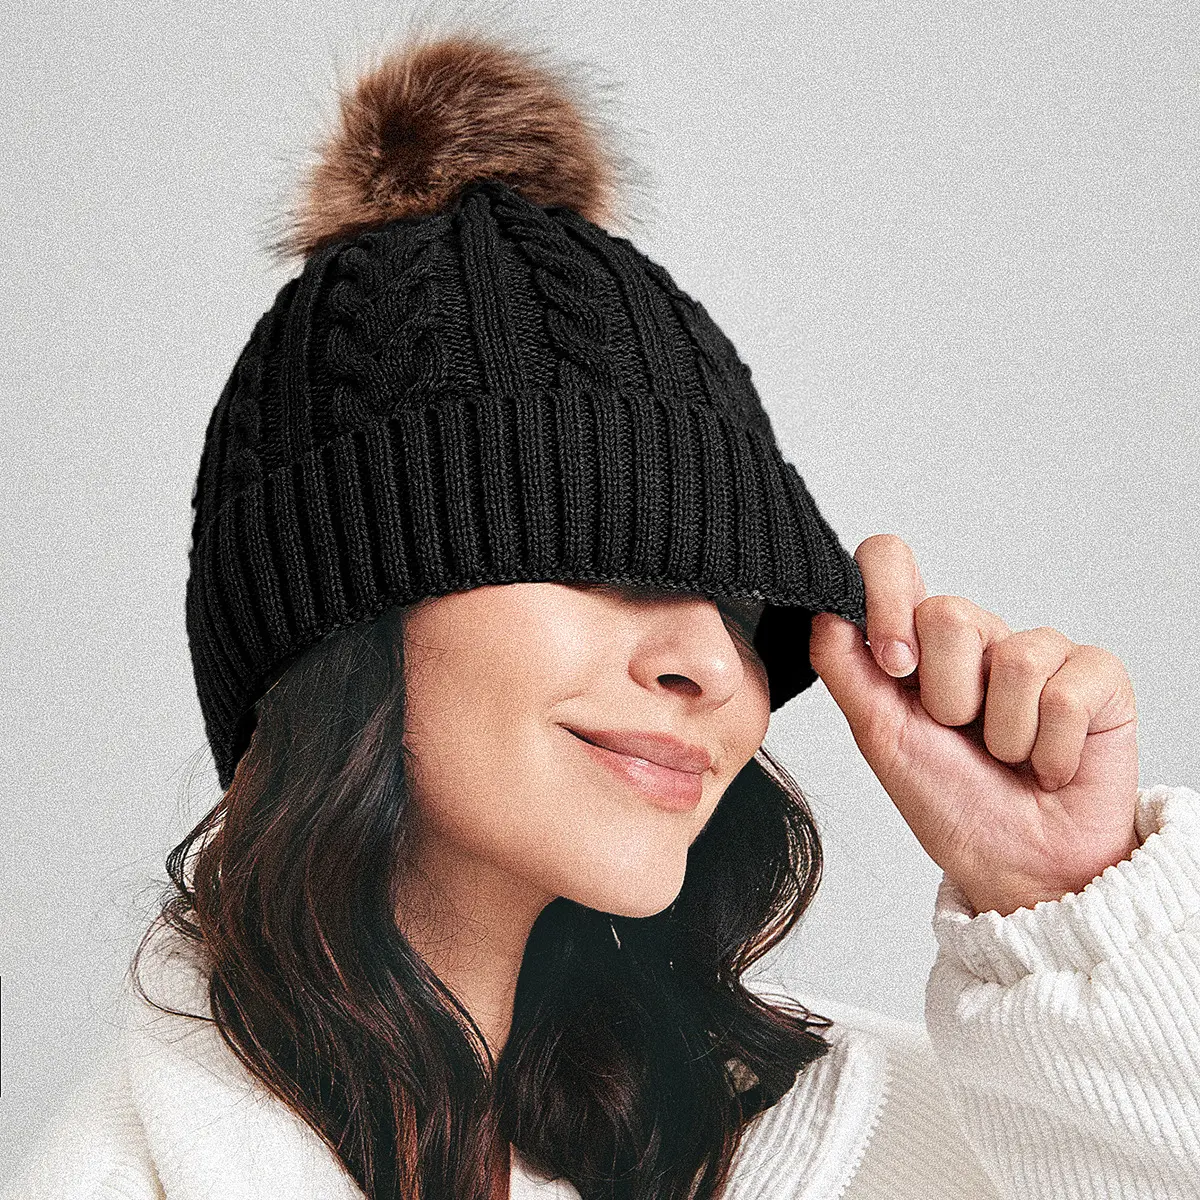 High quality Wool decoration thickened winter warm plain color women's knitted acrylic warm beanie hat